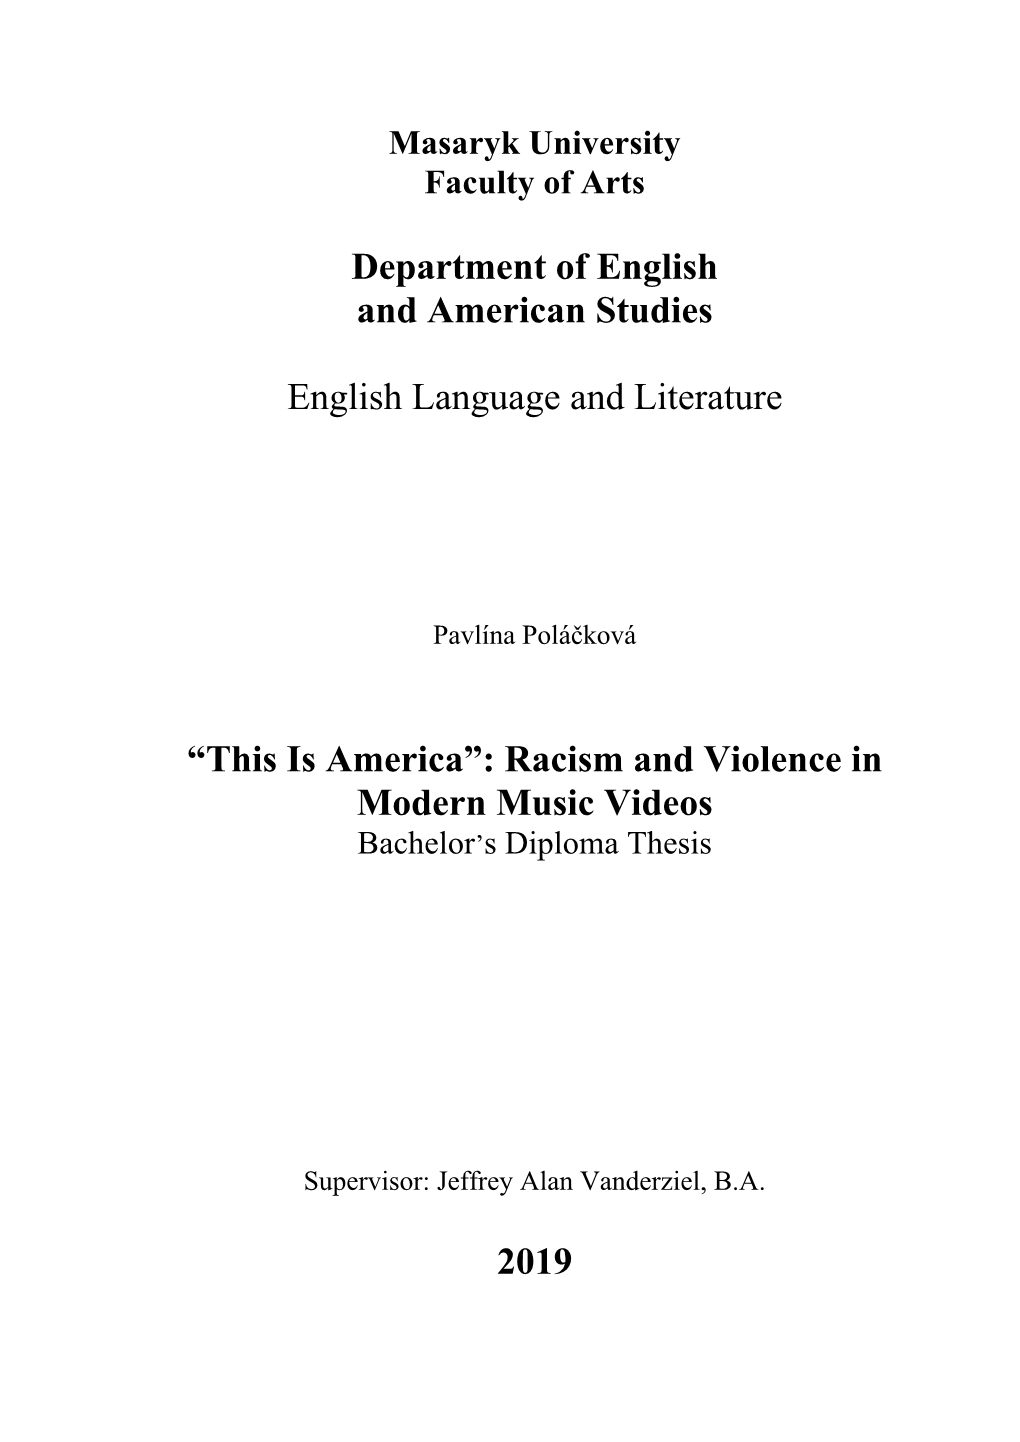 Department of English and American Studies English Language and Literature “This Is America”: Racism and Violence in Modern